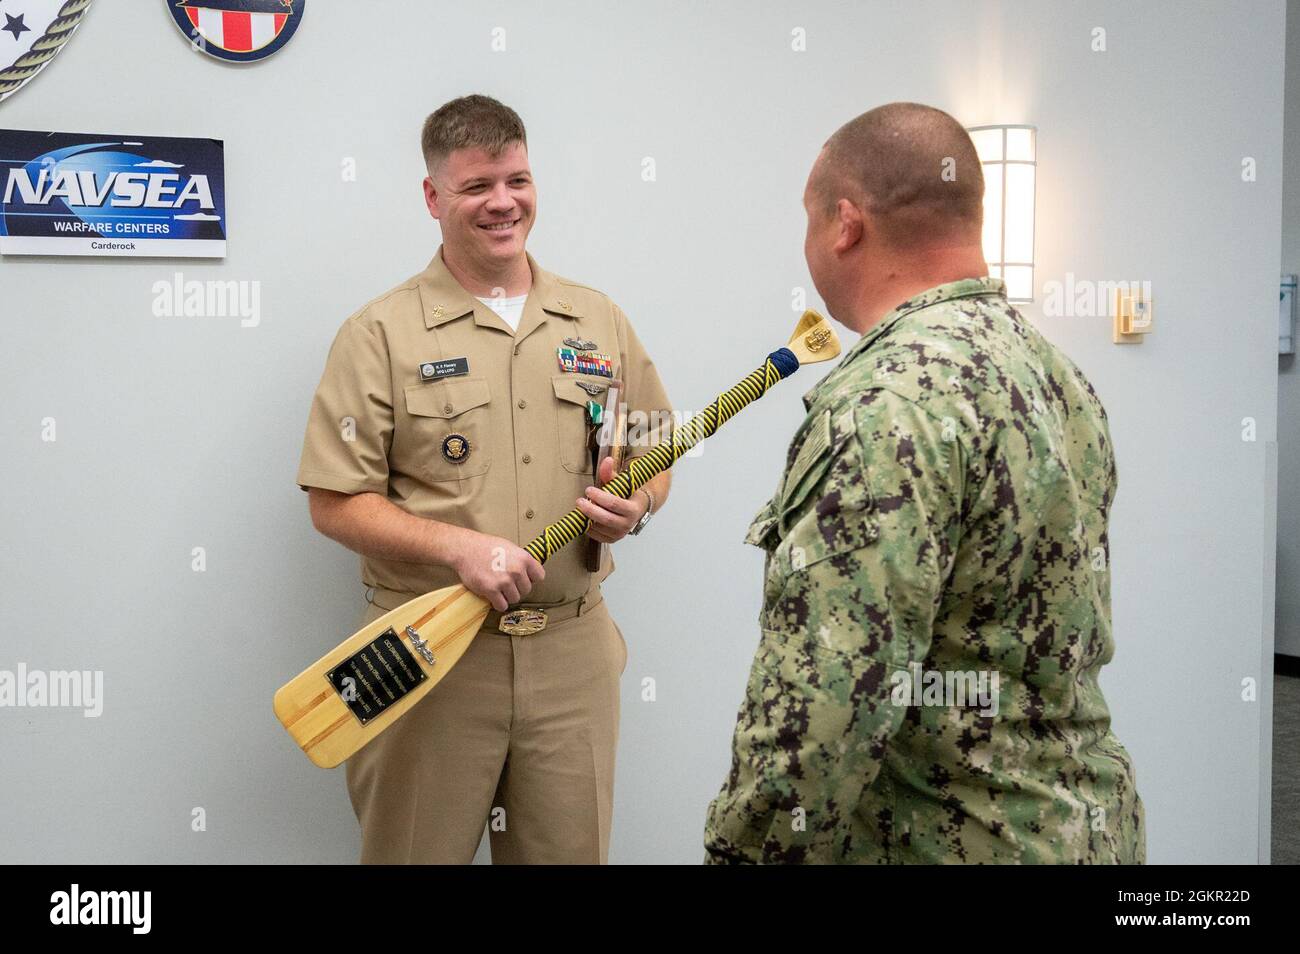 WASHINGTON, DC (June 16, 2021) – Senior Chief Culinary Specialist Korhy Flanary receives a commemorative paddle during his end-of-tour award ceremony, held onboard Washington Navy Yard. Stock Photo